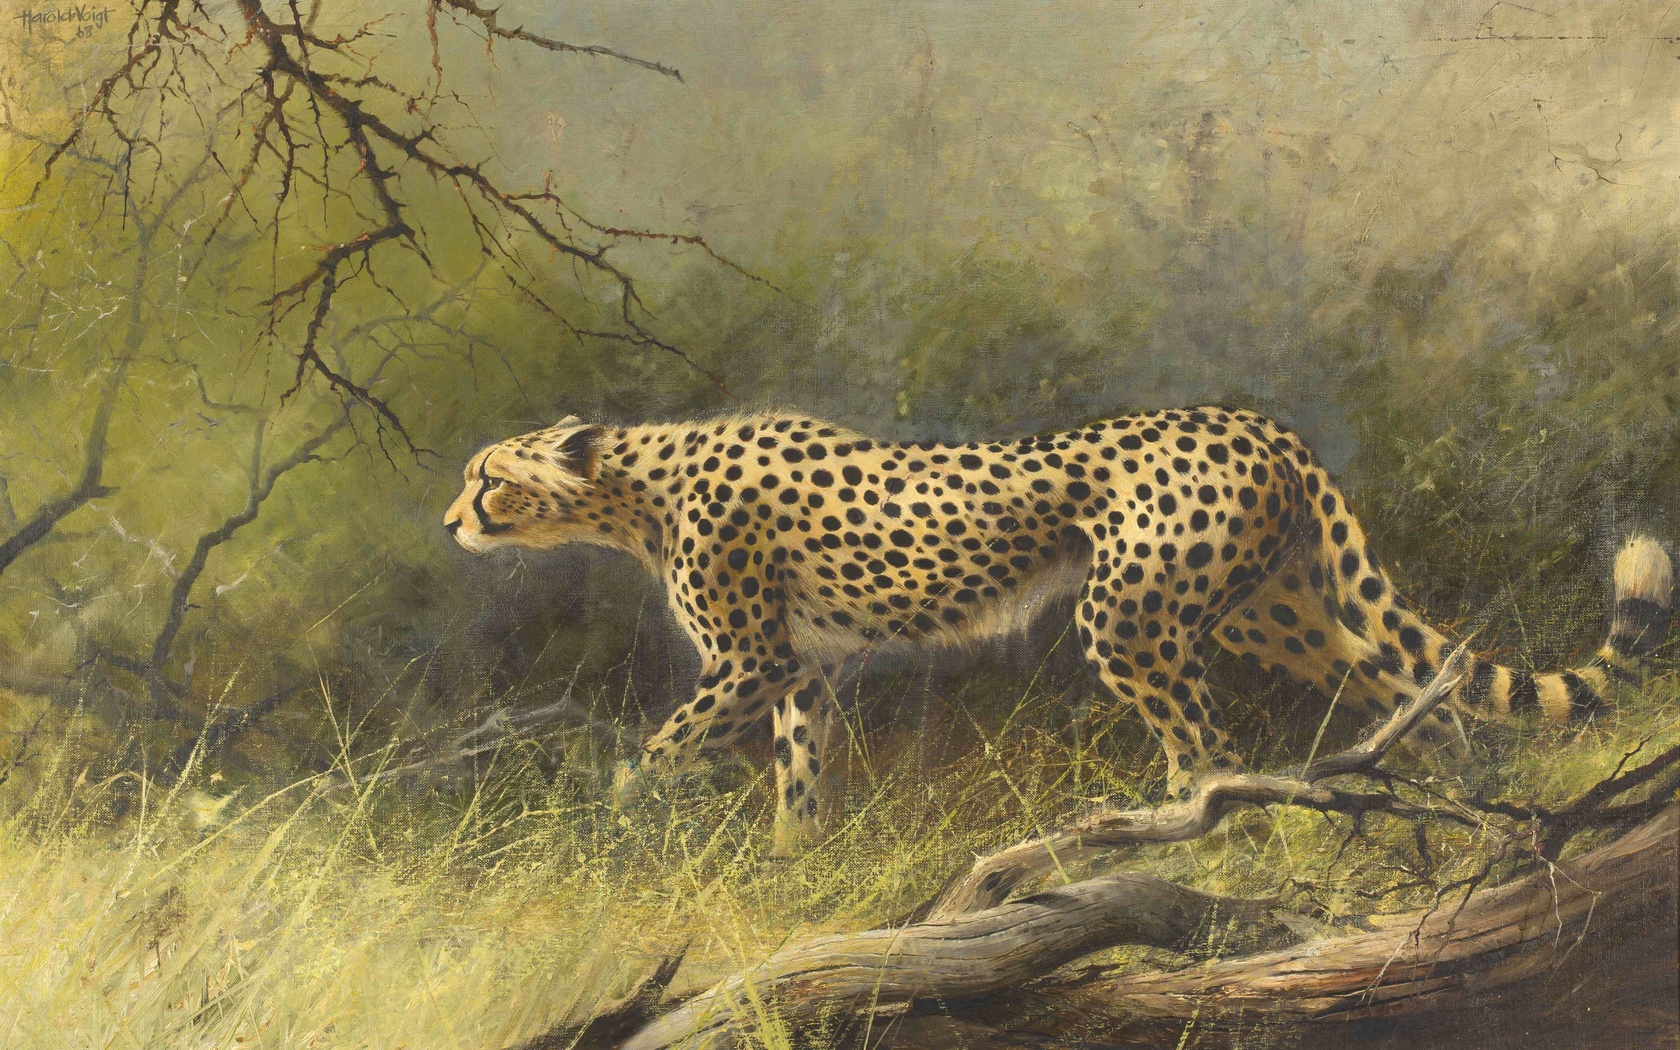 harold voigt, south african, cheetah